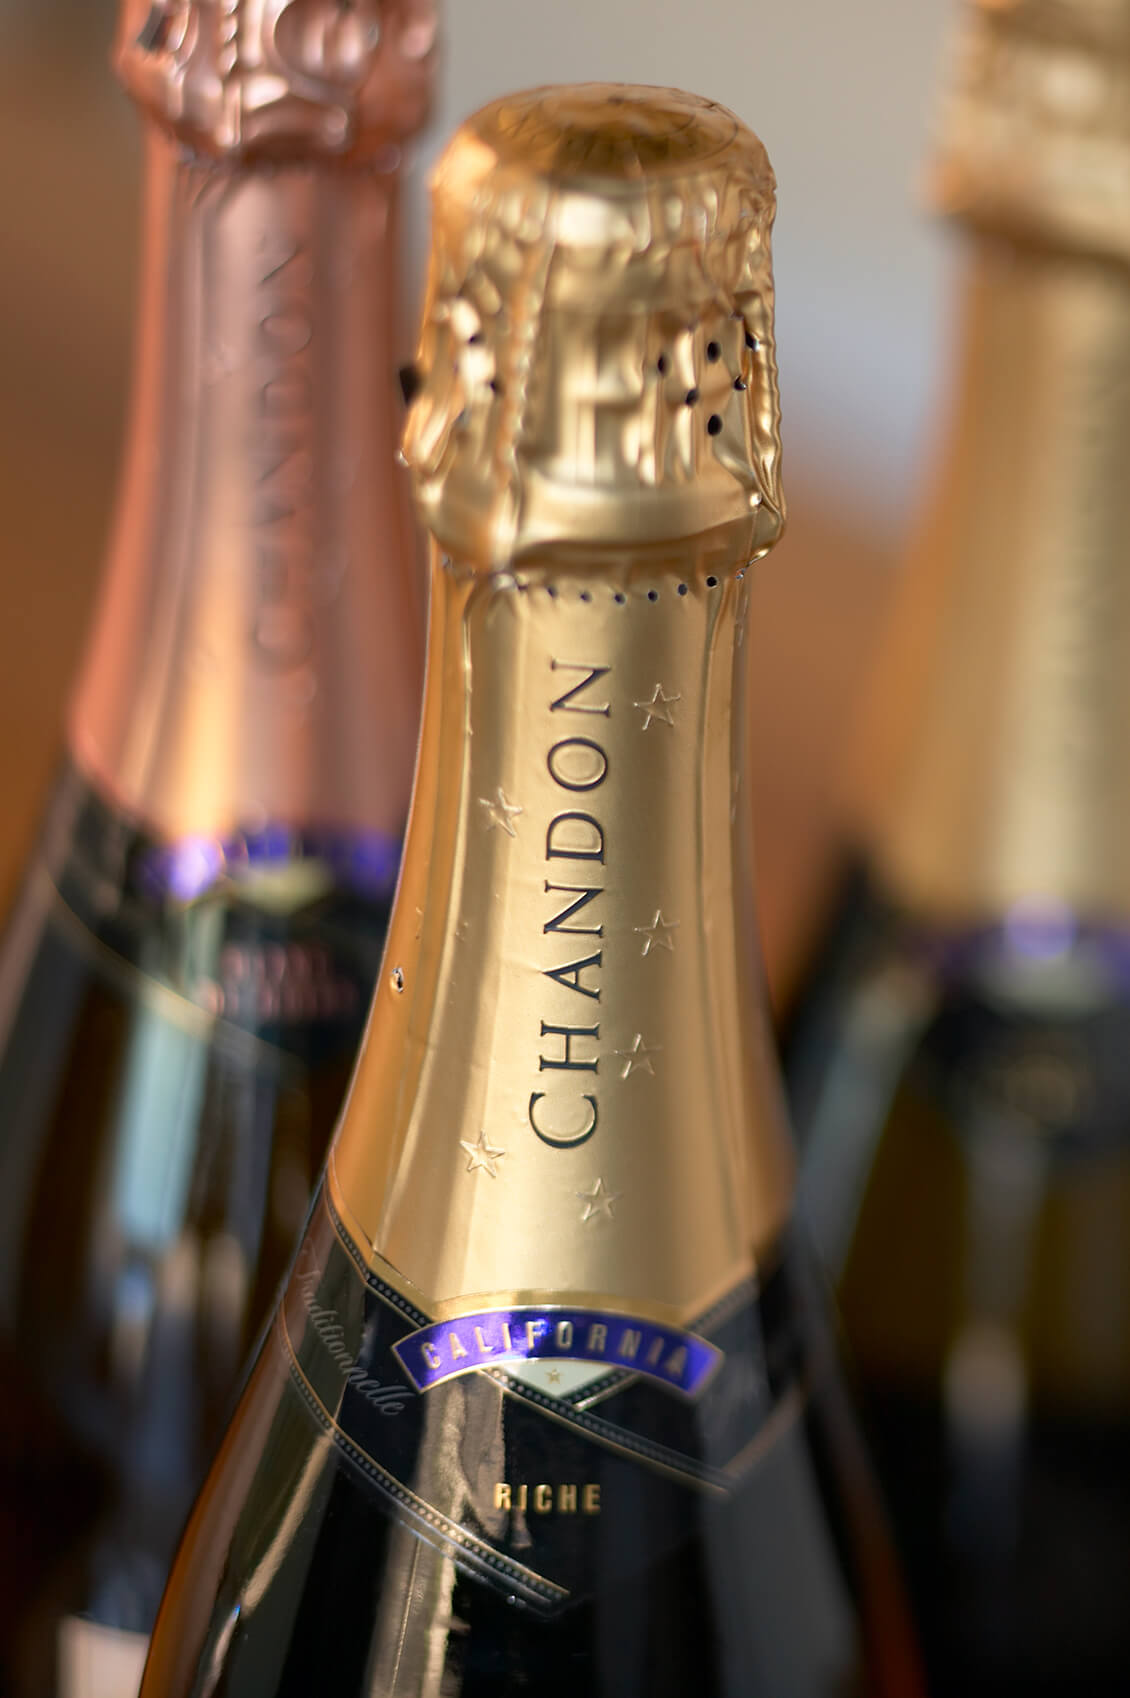 Chandon champagne bottle best food photography